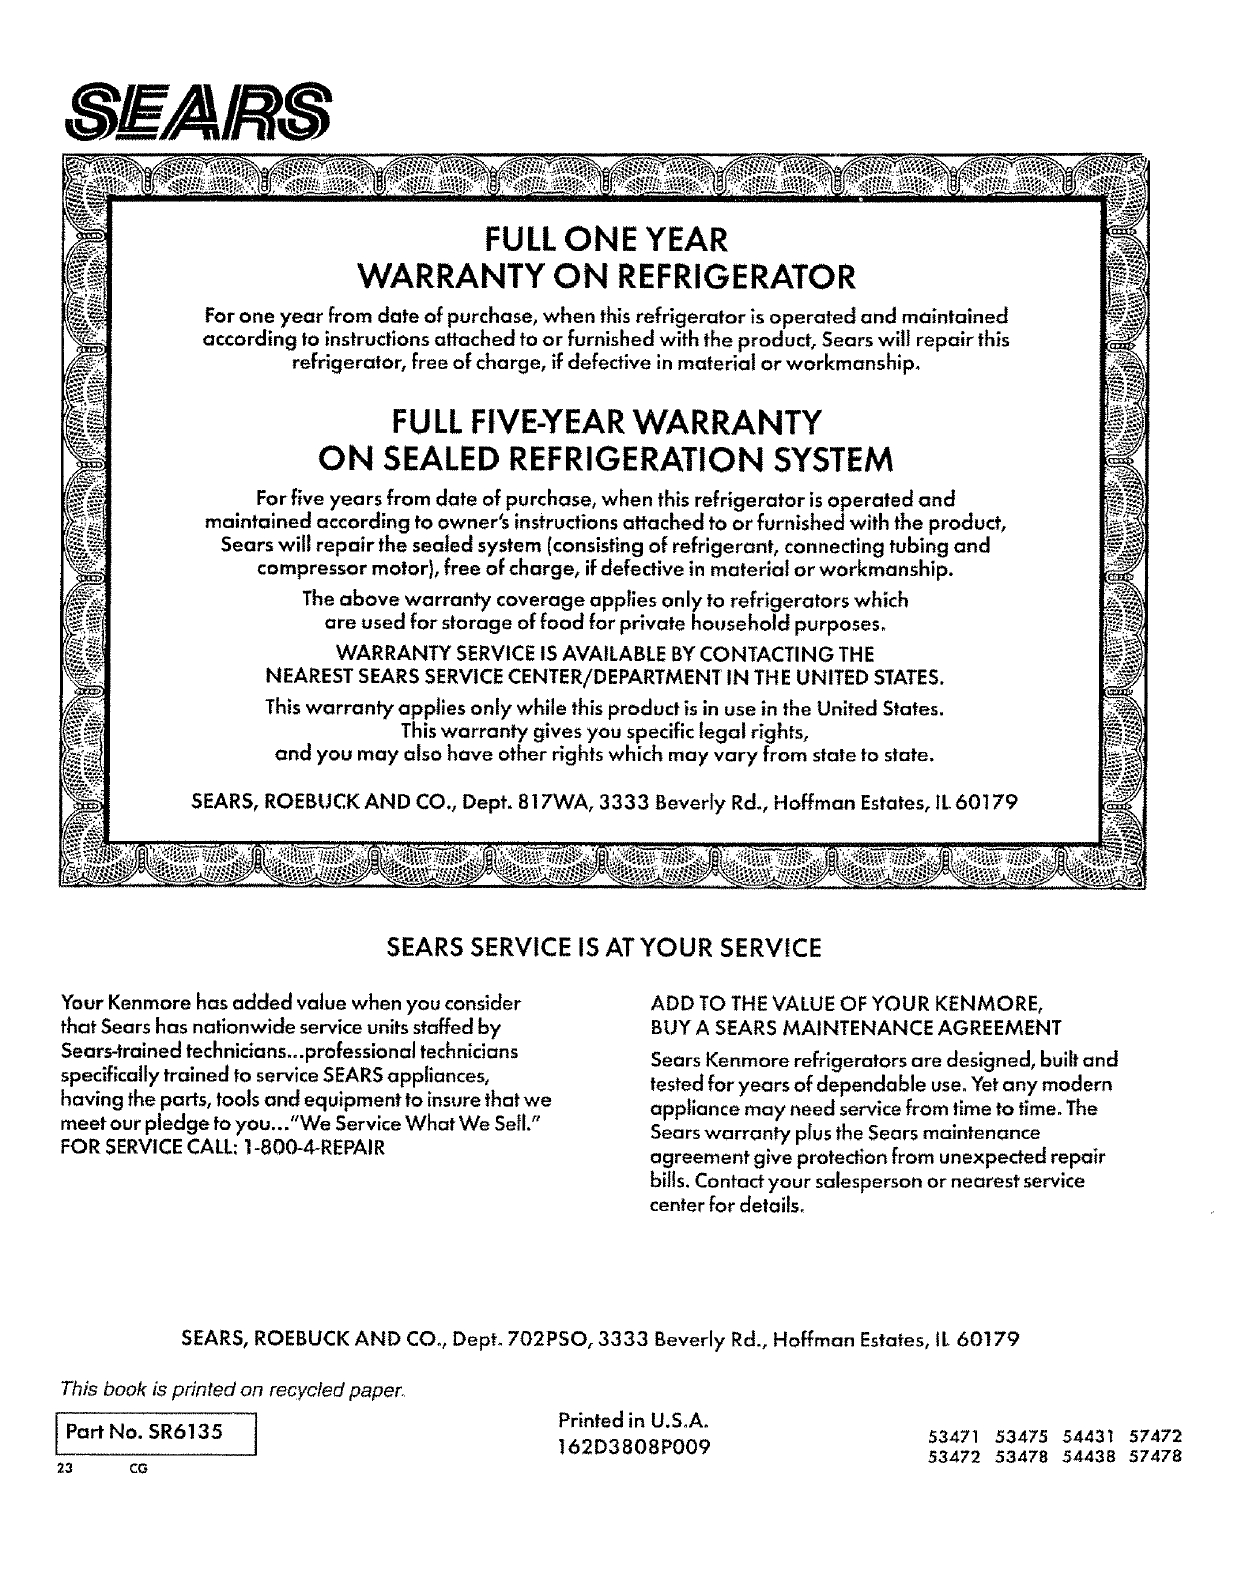 Sears Protection Agreement Number Page 16 Of Sears Refrigerator 54431 User Guide Manualsonline